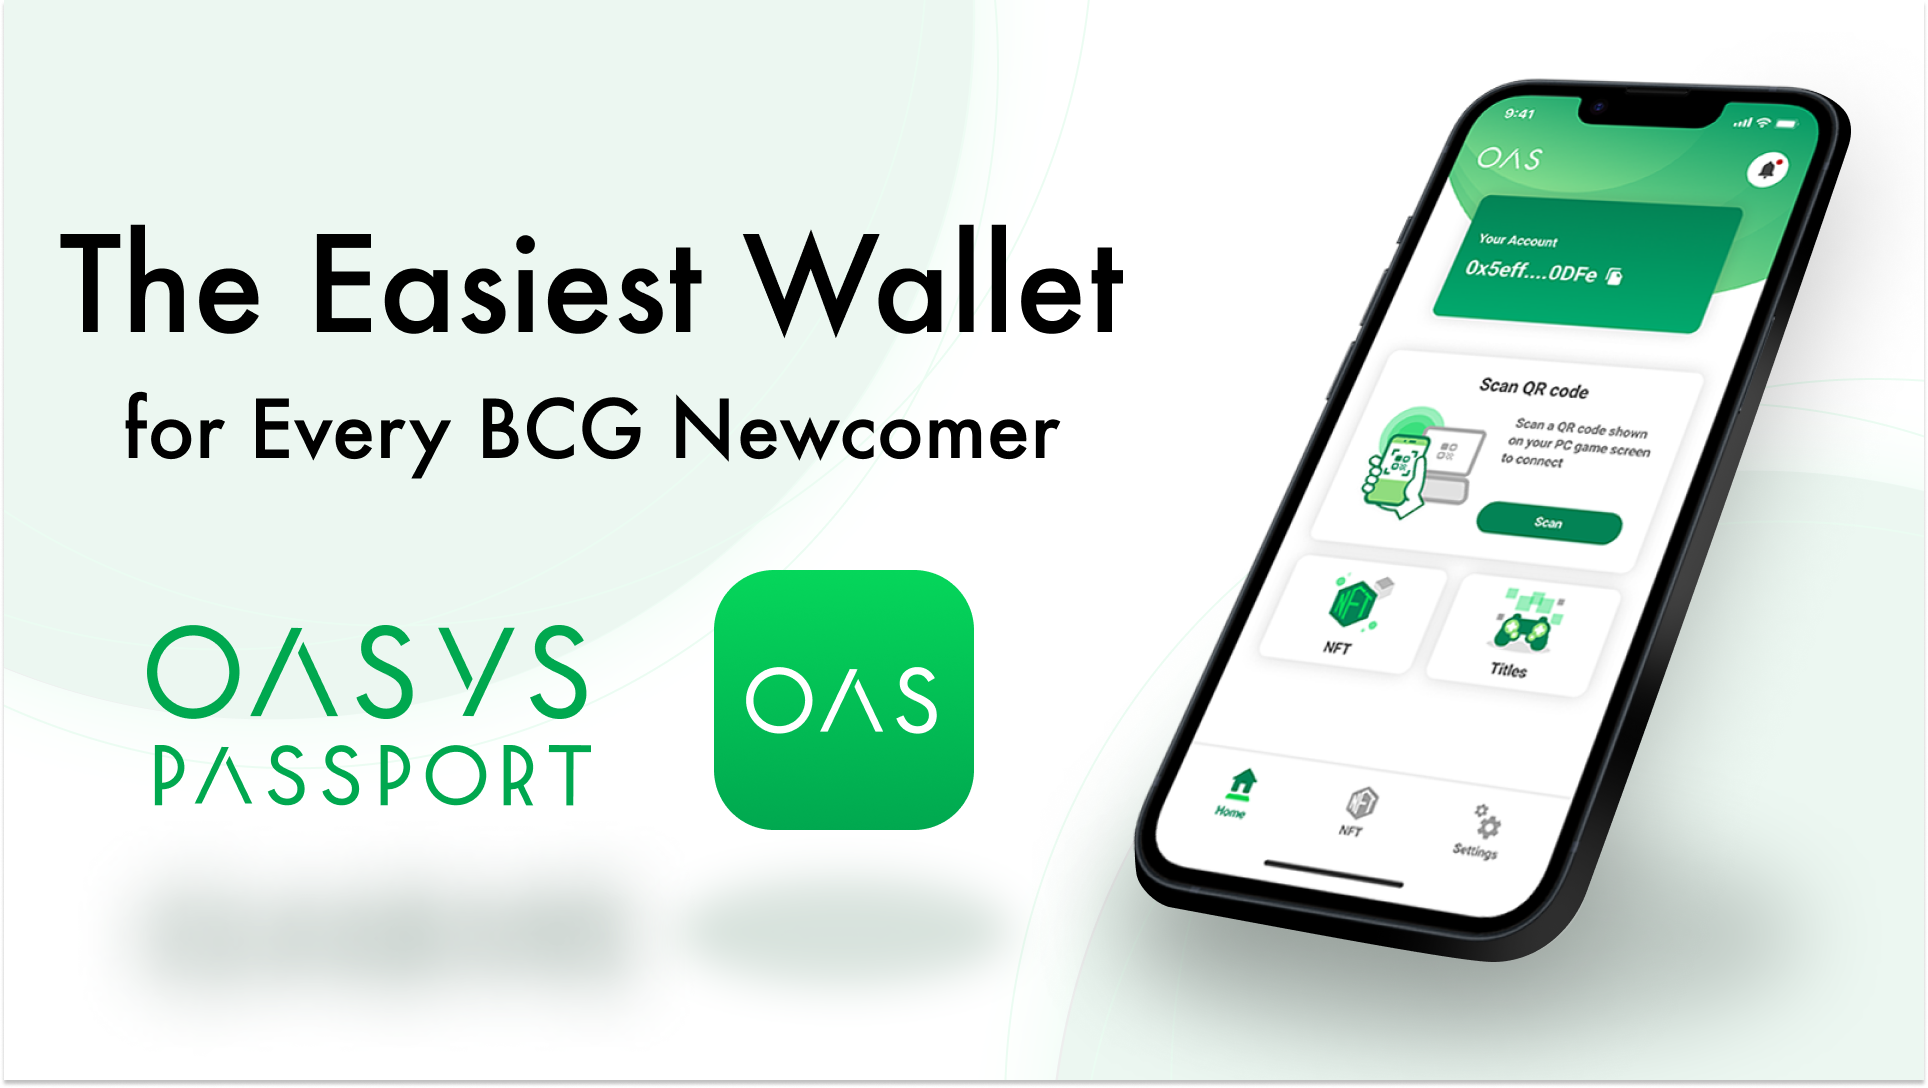 double jump.tokyo Launches Alpha Version of Oasys Passport a New Innovative Specialized Wallet 12